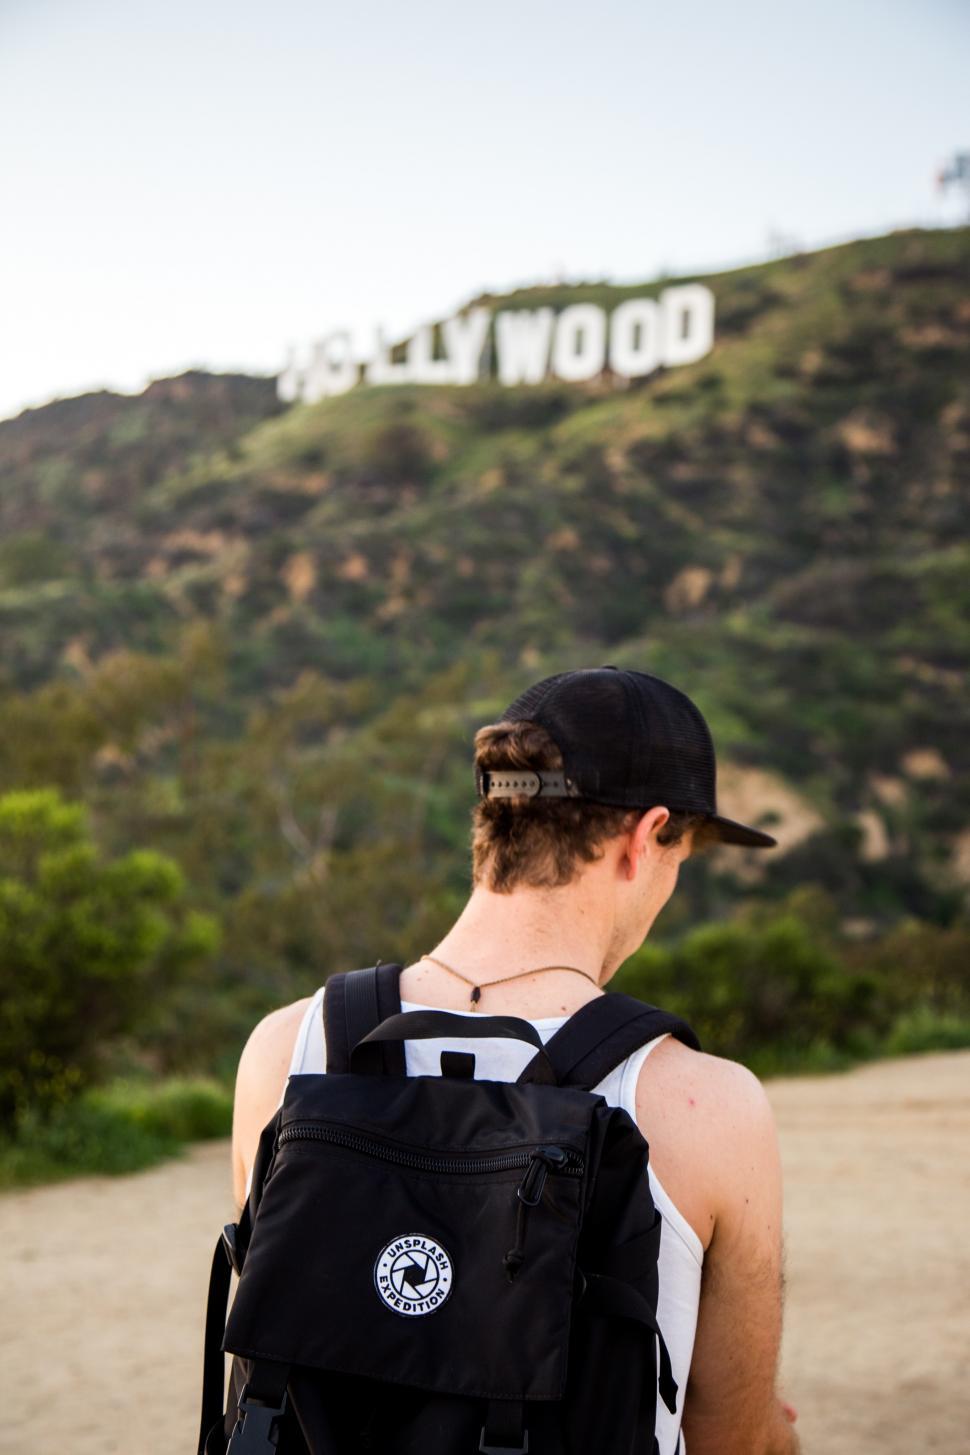 Free Image of Backpacker and Hollywood Mountain 